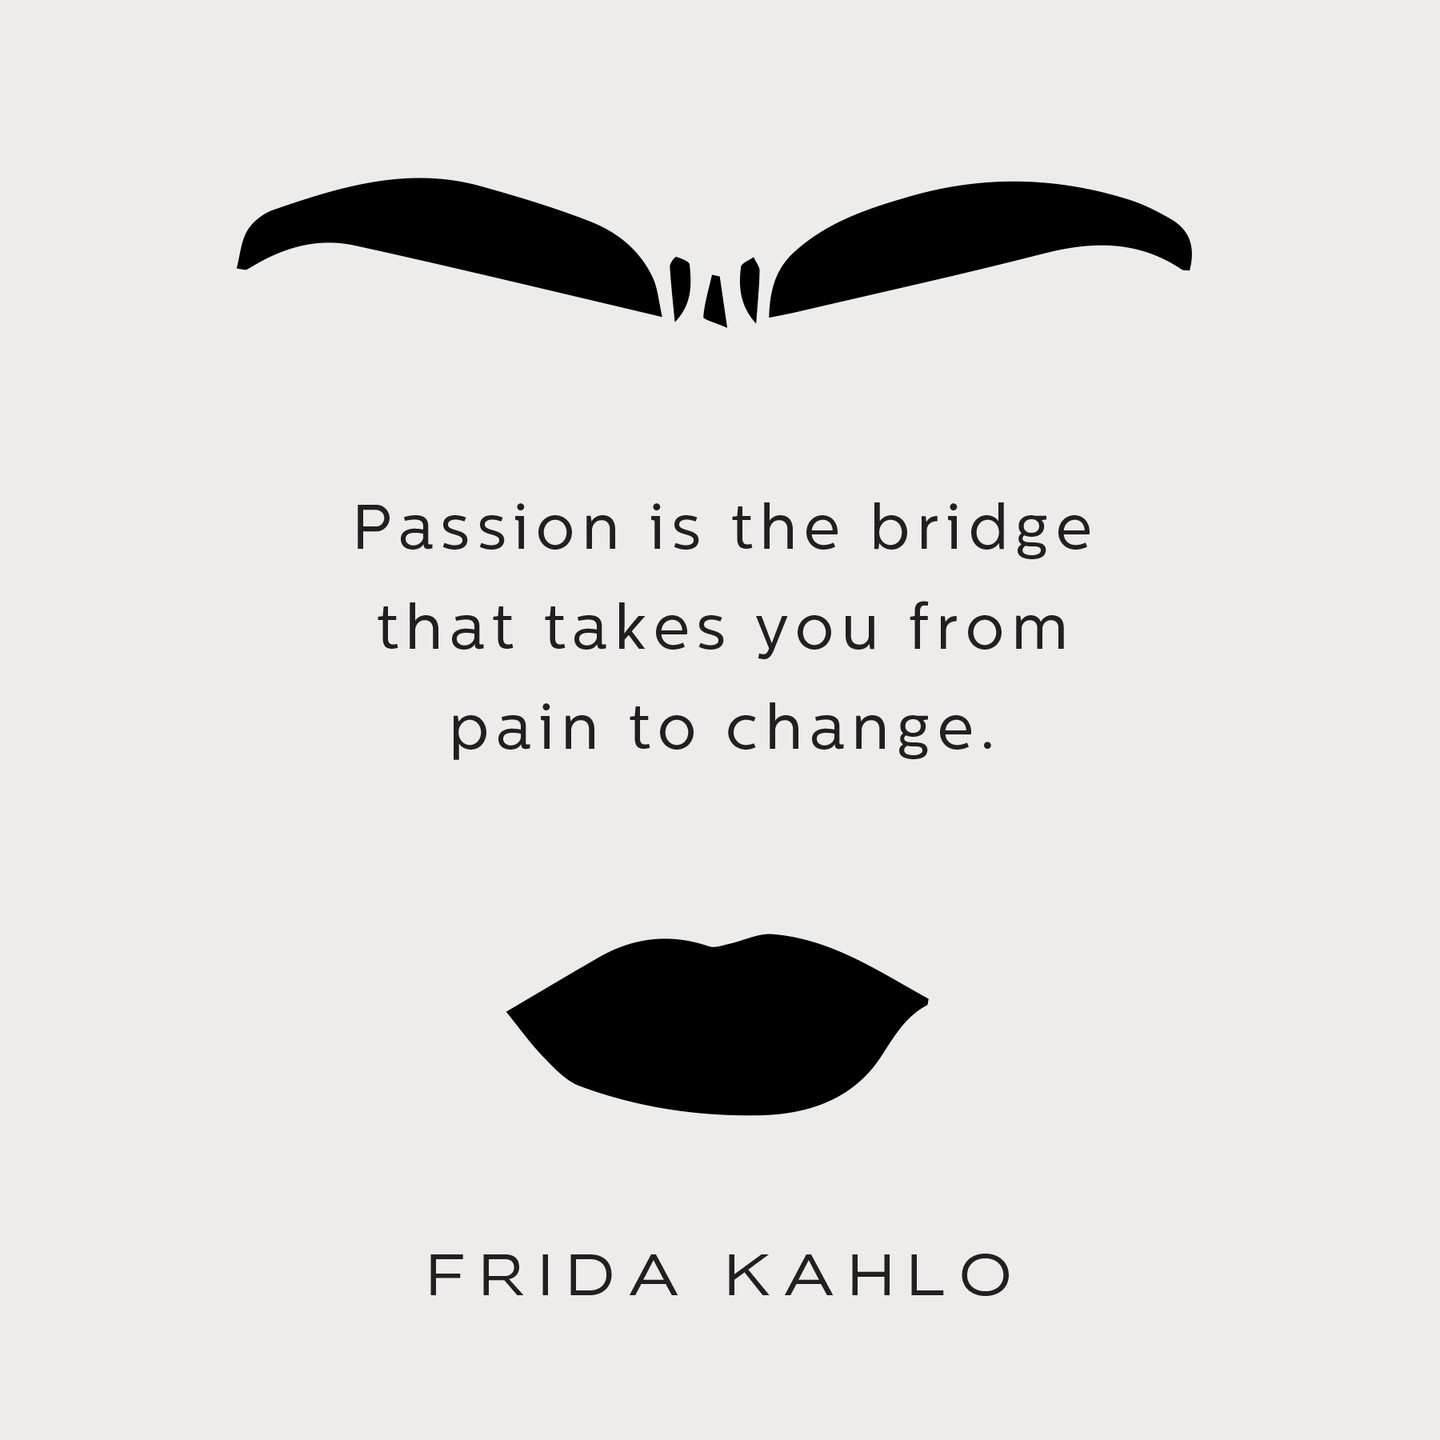 International Women's Day ✨

You know it had to come from the original uni-brow herself!

Passion is the bridge that takes you from pain to change.
- Frida Kahlo

A massive amount of passion is poured into the work we do on a consistent basis. 

You know it, you feel it, you live and breathe it.

It's our course of action that will begin to pierce through and create change.

We begin to recognize that the sweet taste of change can only exist because of the pain along the way.

As they say, blood, sweat and tears. 

So, as business owners or women, we do it over and over and over again. 

Whatever pain you endured or are enduring, continue to let passion fuel that fire and blaze forward!!

🖤M-C

 #brandstrategy #brandstrategist #branding #branddesigner #brandingconsultant #brandconsultant #brandingkc #marketing #marketingconsultant #marketingstrategy #marketingstrategist #marketingstrategykc #marketingagency #creativeagency #brandingagency #kansascitymarketing #marketingtips #businessconsultant #consultant #brandingtips #brandingandmarketing #brandingstudio #femalefounder #internationalwomensday #internationalwomensday2023 #womensday #womeninbusiness